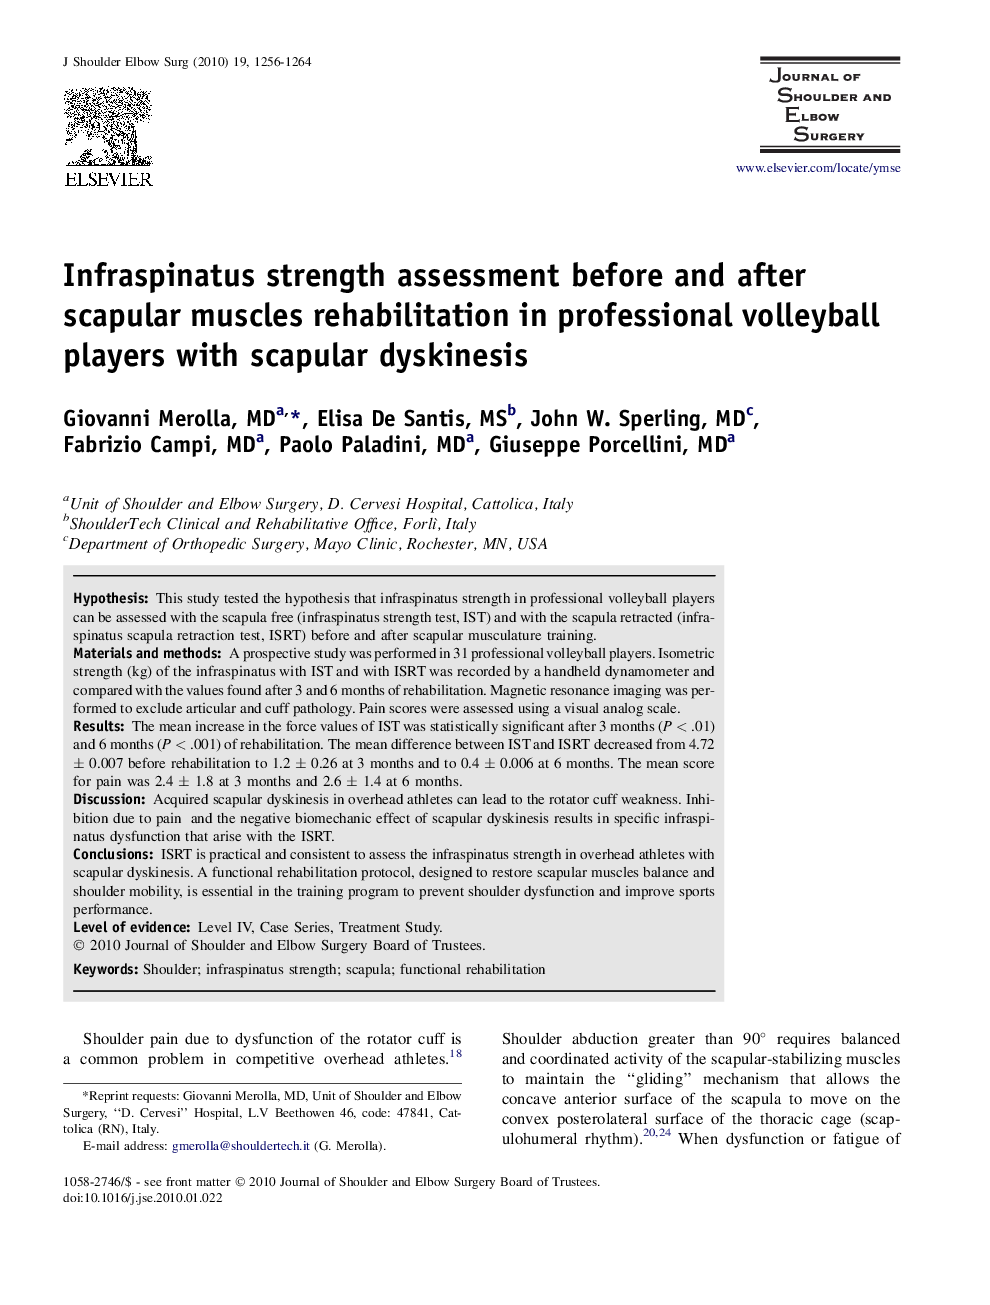 Infraspinatus strength assessment before and after scapular muscles rehabilitation in professional volleyball players with scapular dyskinesis